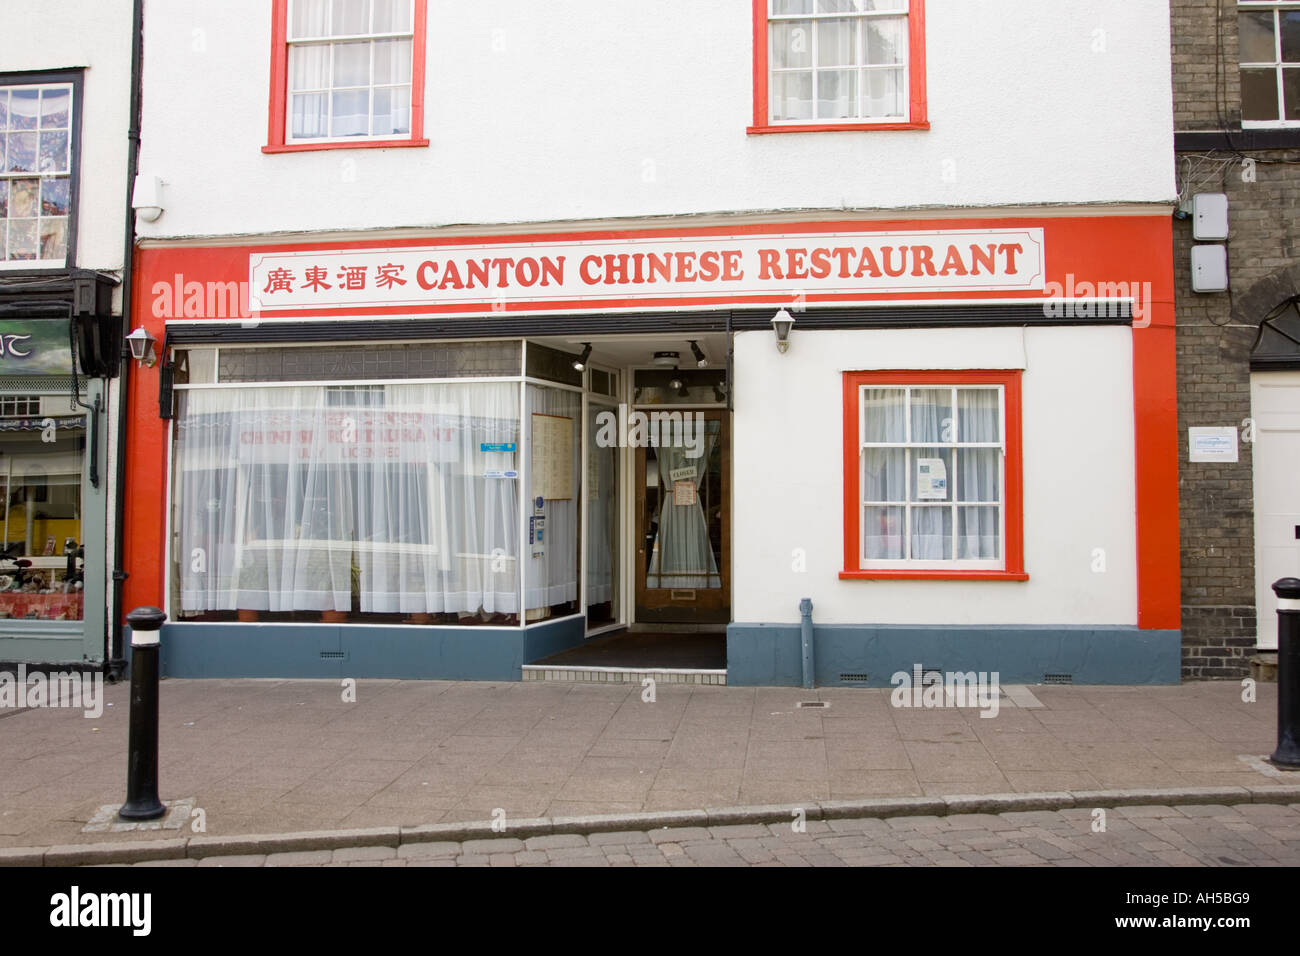 a Chinese style restaurant in Bury St Edmunds, Suffolk, UK Stock Photo